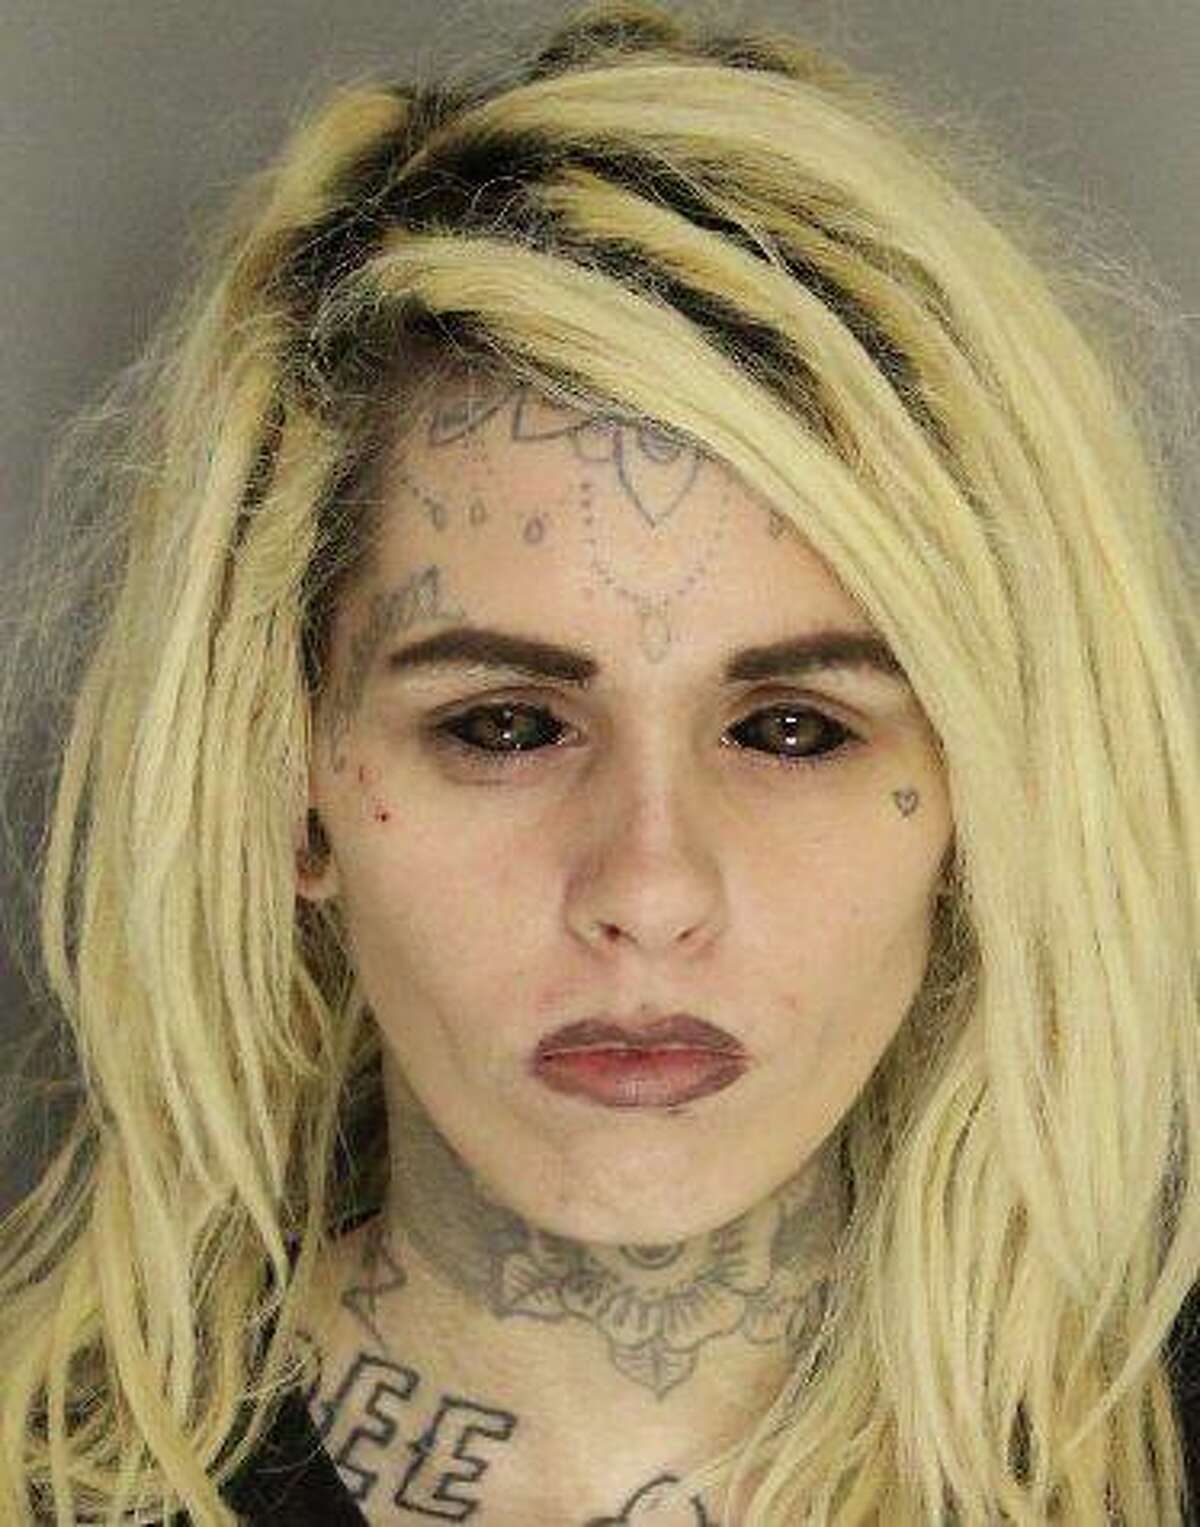 Runaway parolee with odd face and neck tattoos found